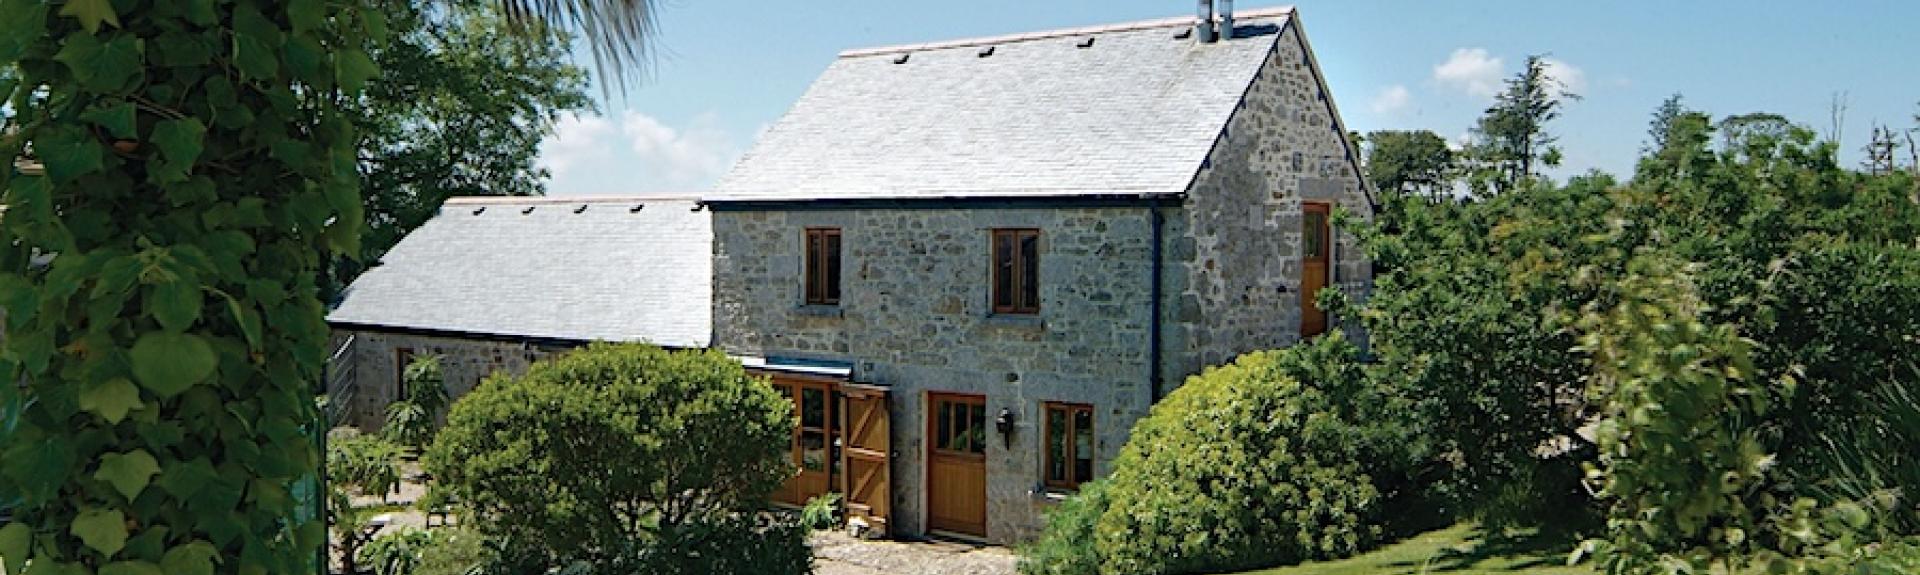 A 2-storey Cornish Barn conversion overlooks well-kept lawns and gardens.